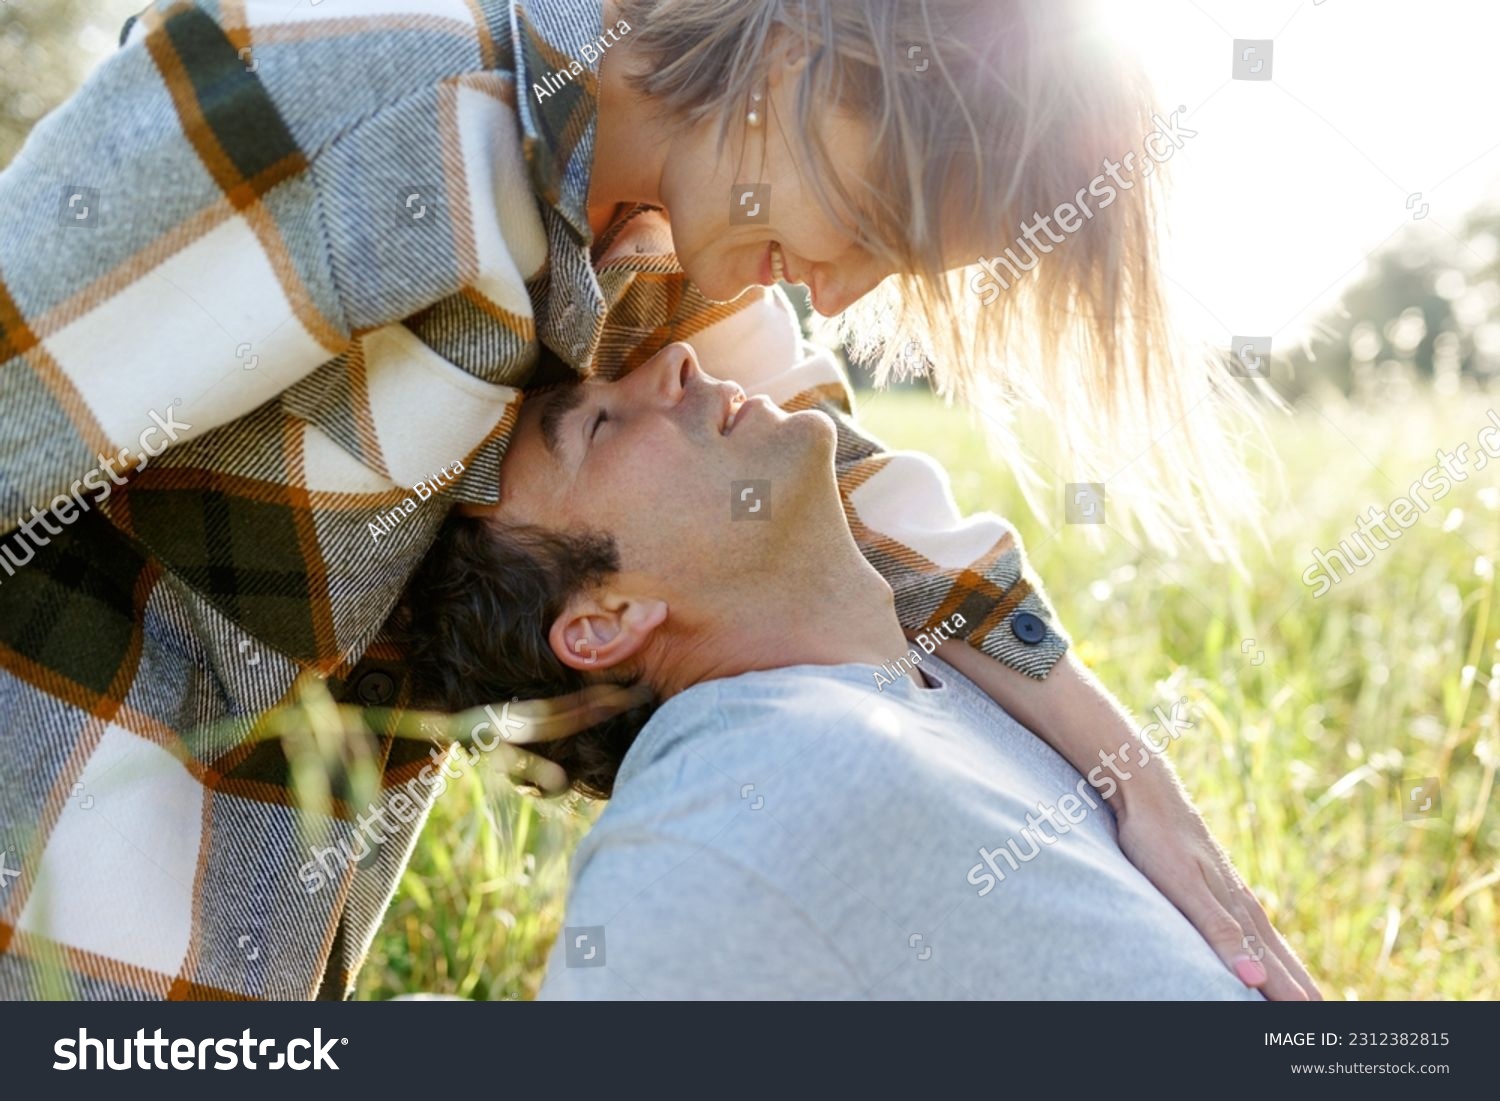 Close up portrait man and woman laughing together.Romantic affectionate couple on a holiday.Couple embracing and smiling. Sunset sunshine . #2312382815